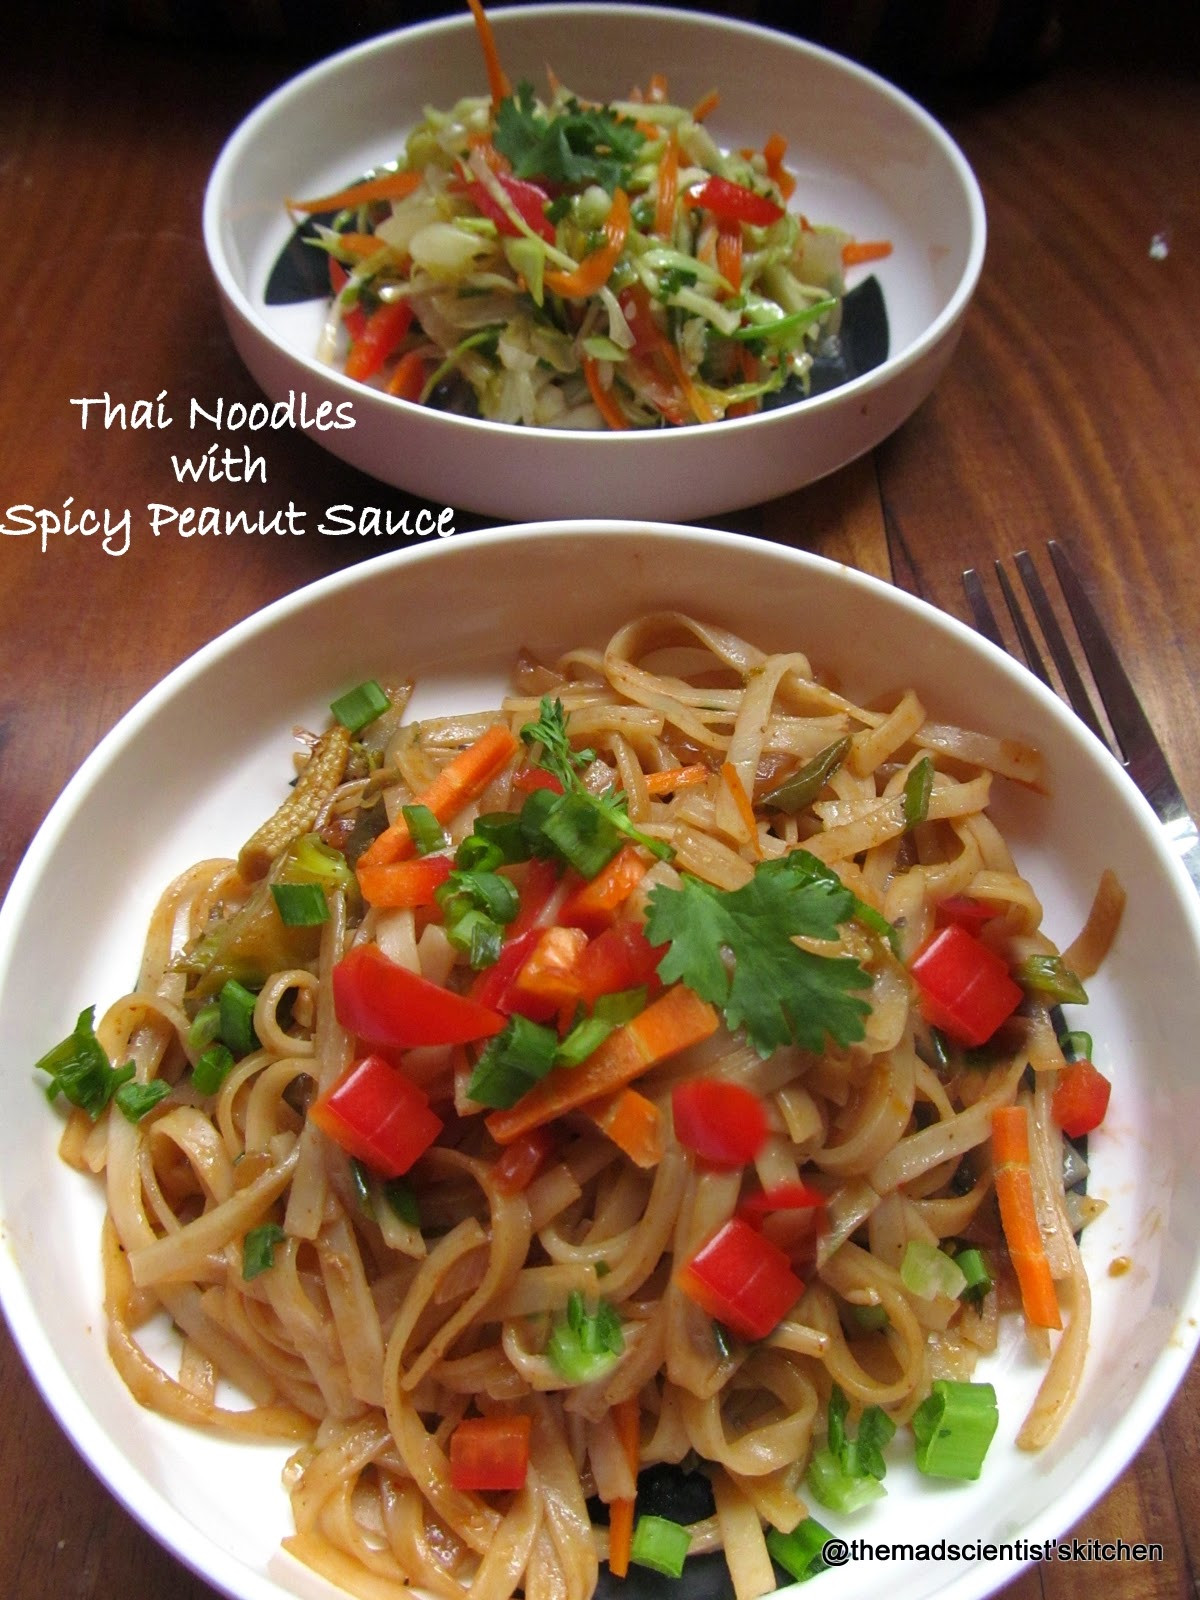 Thai Noodles With Peanut Sauce
 The Mad Scientist s Kitchen Thai Noodles with Spicy